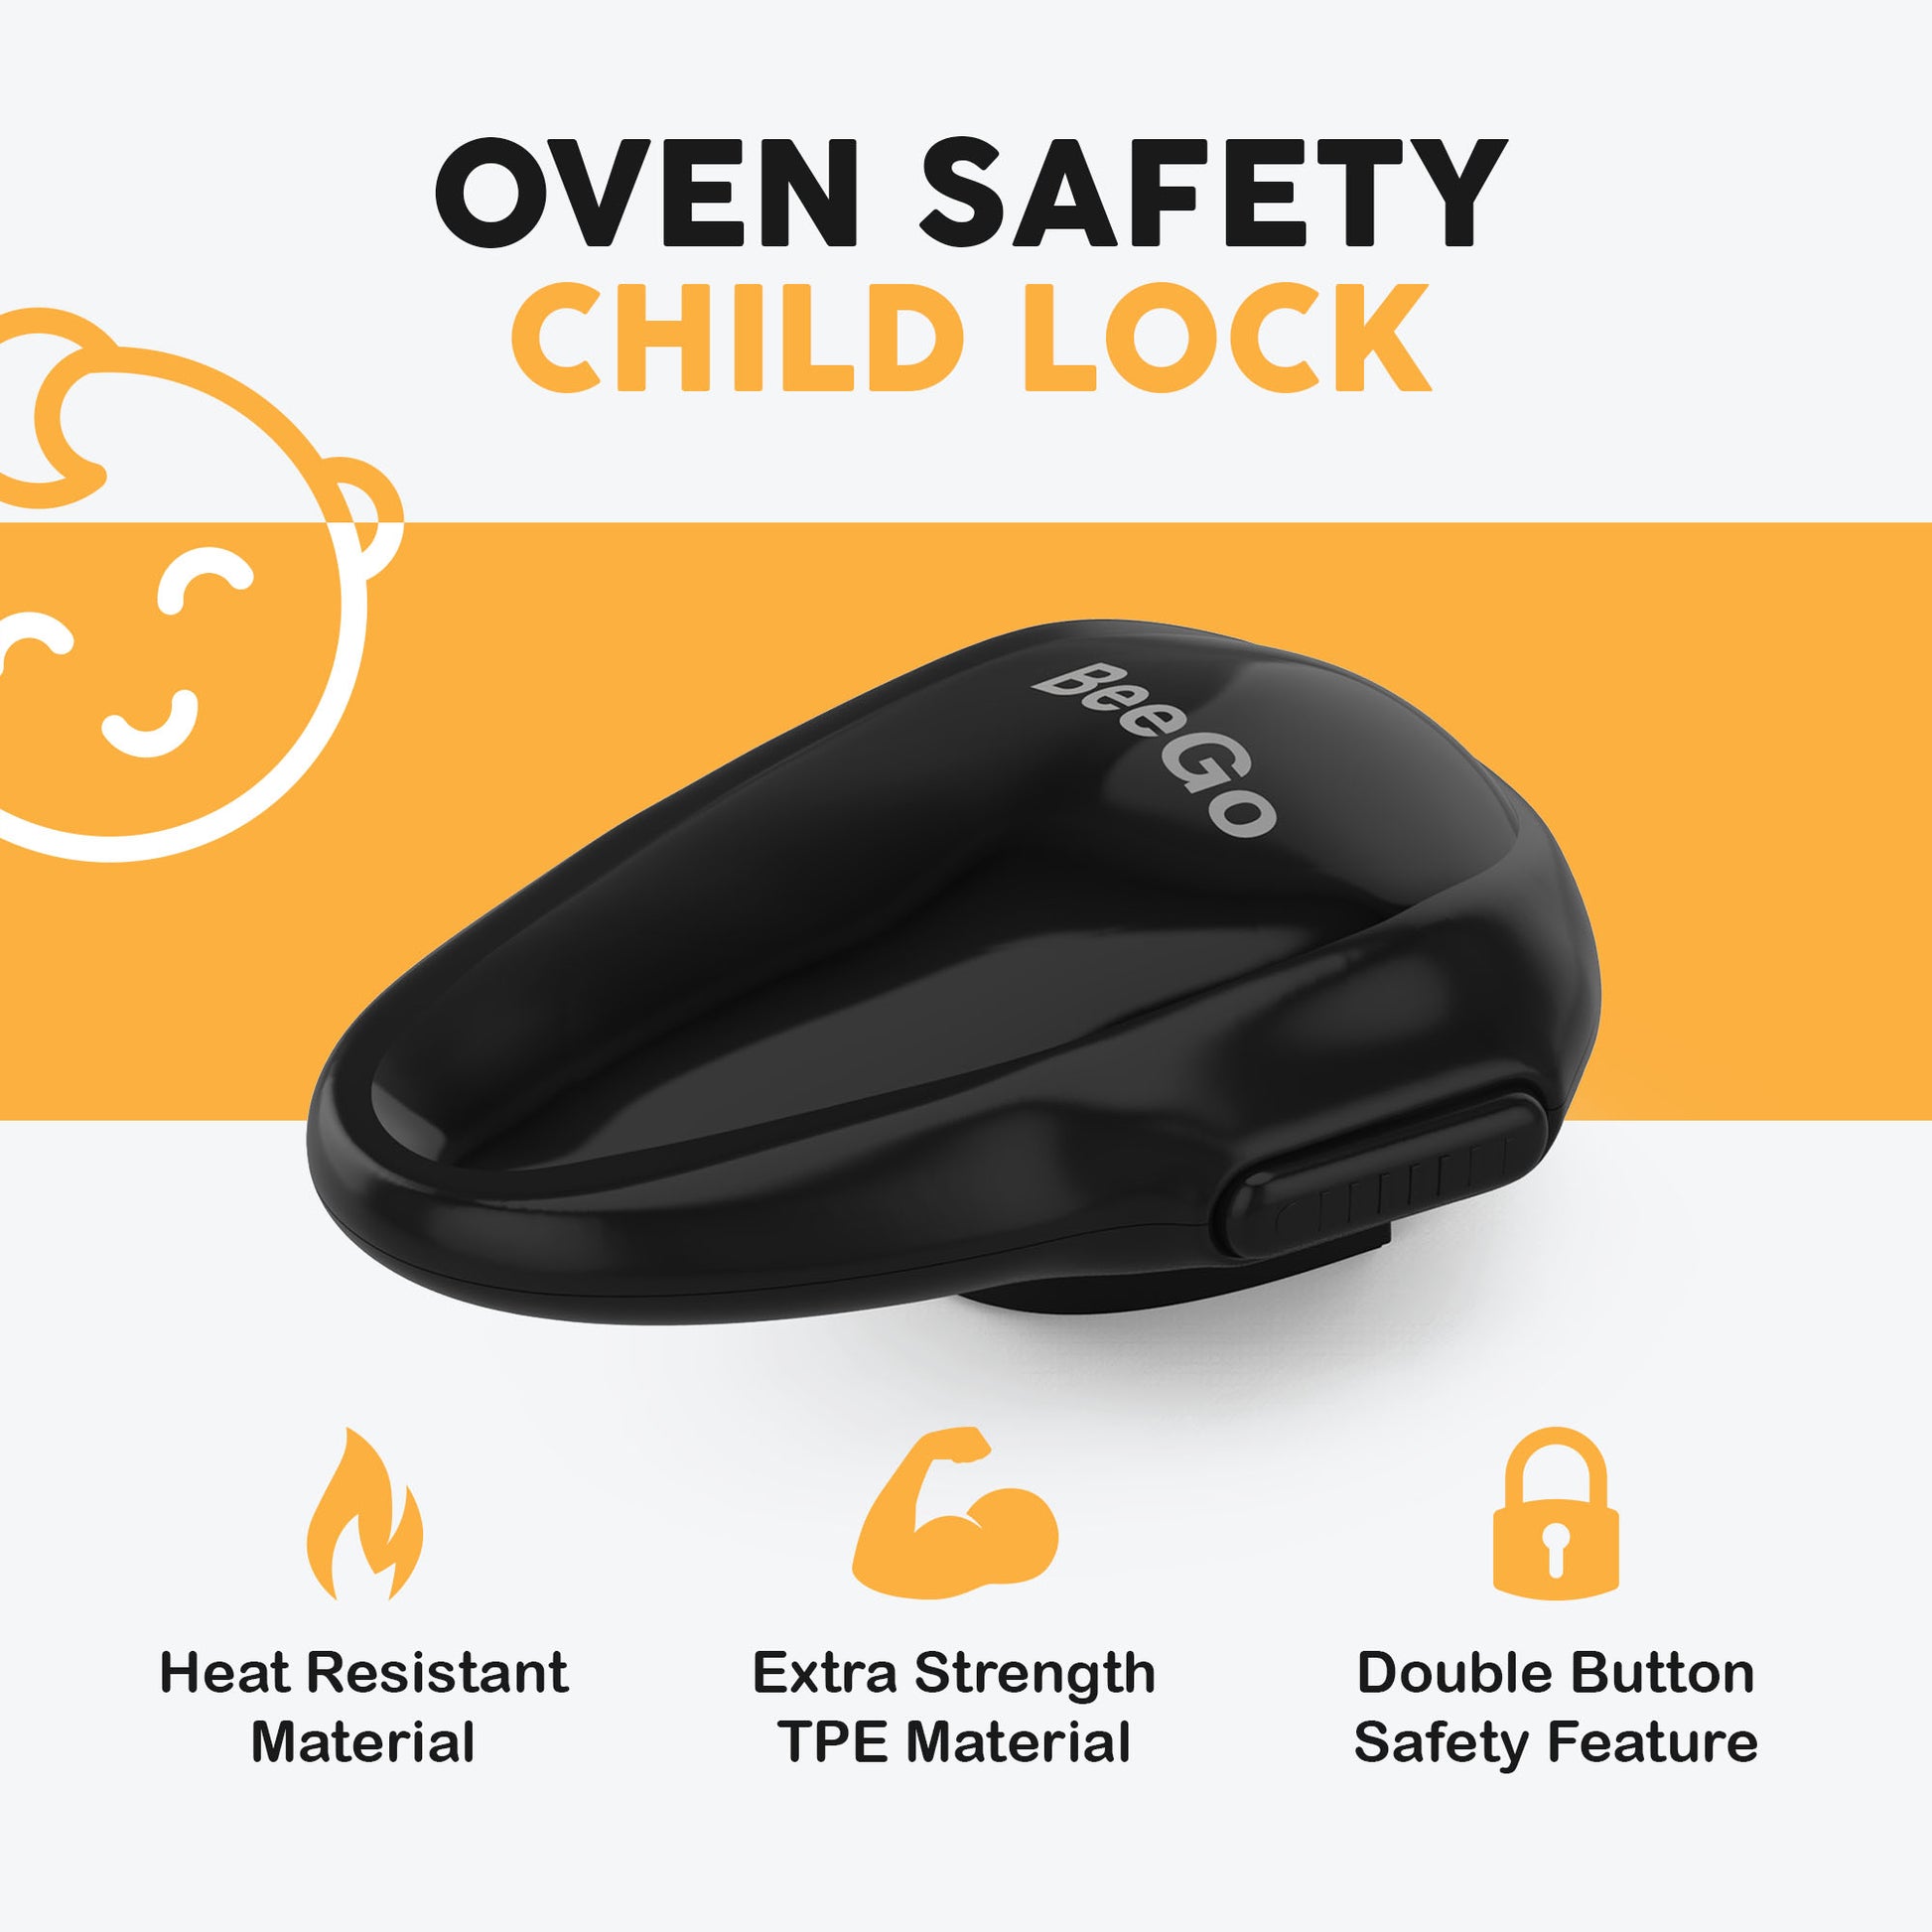 Oven Safety Child Lock - Beego Safety